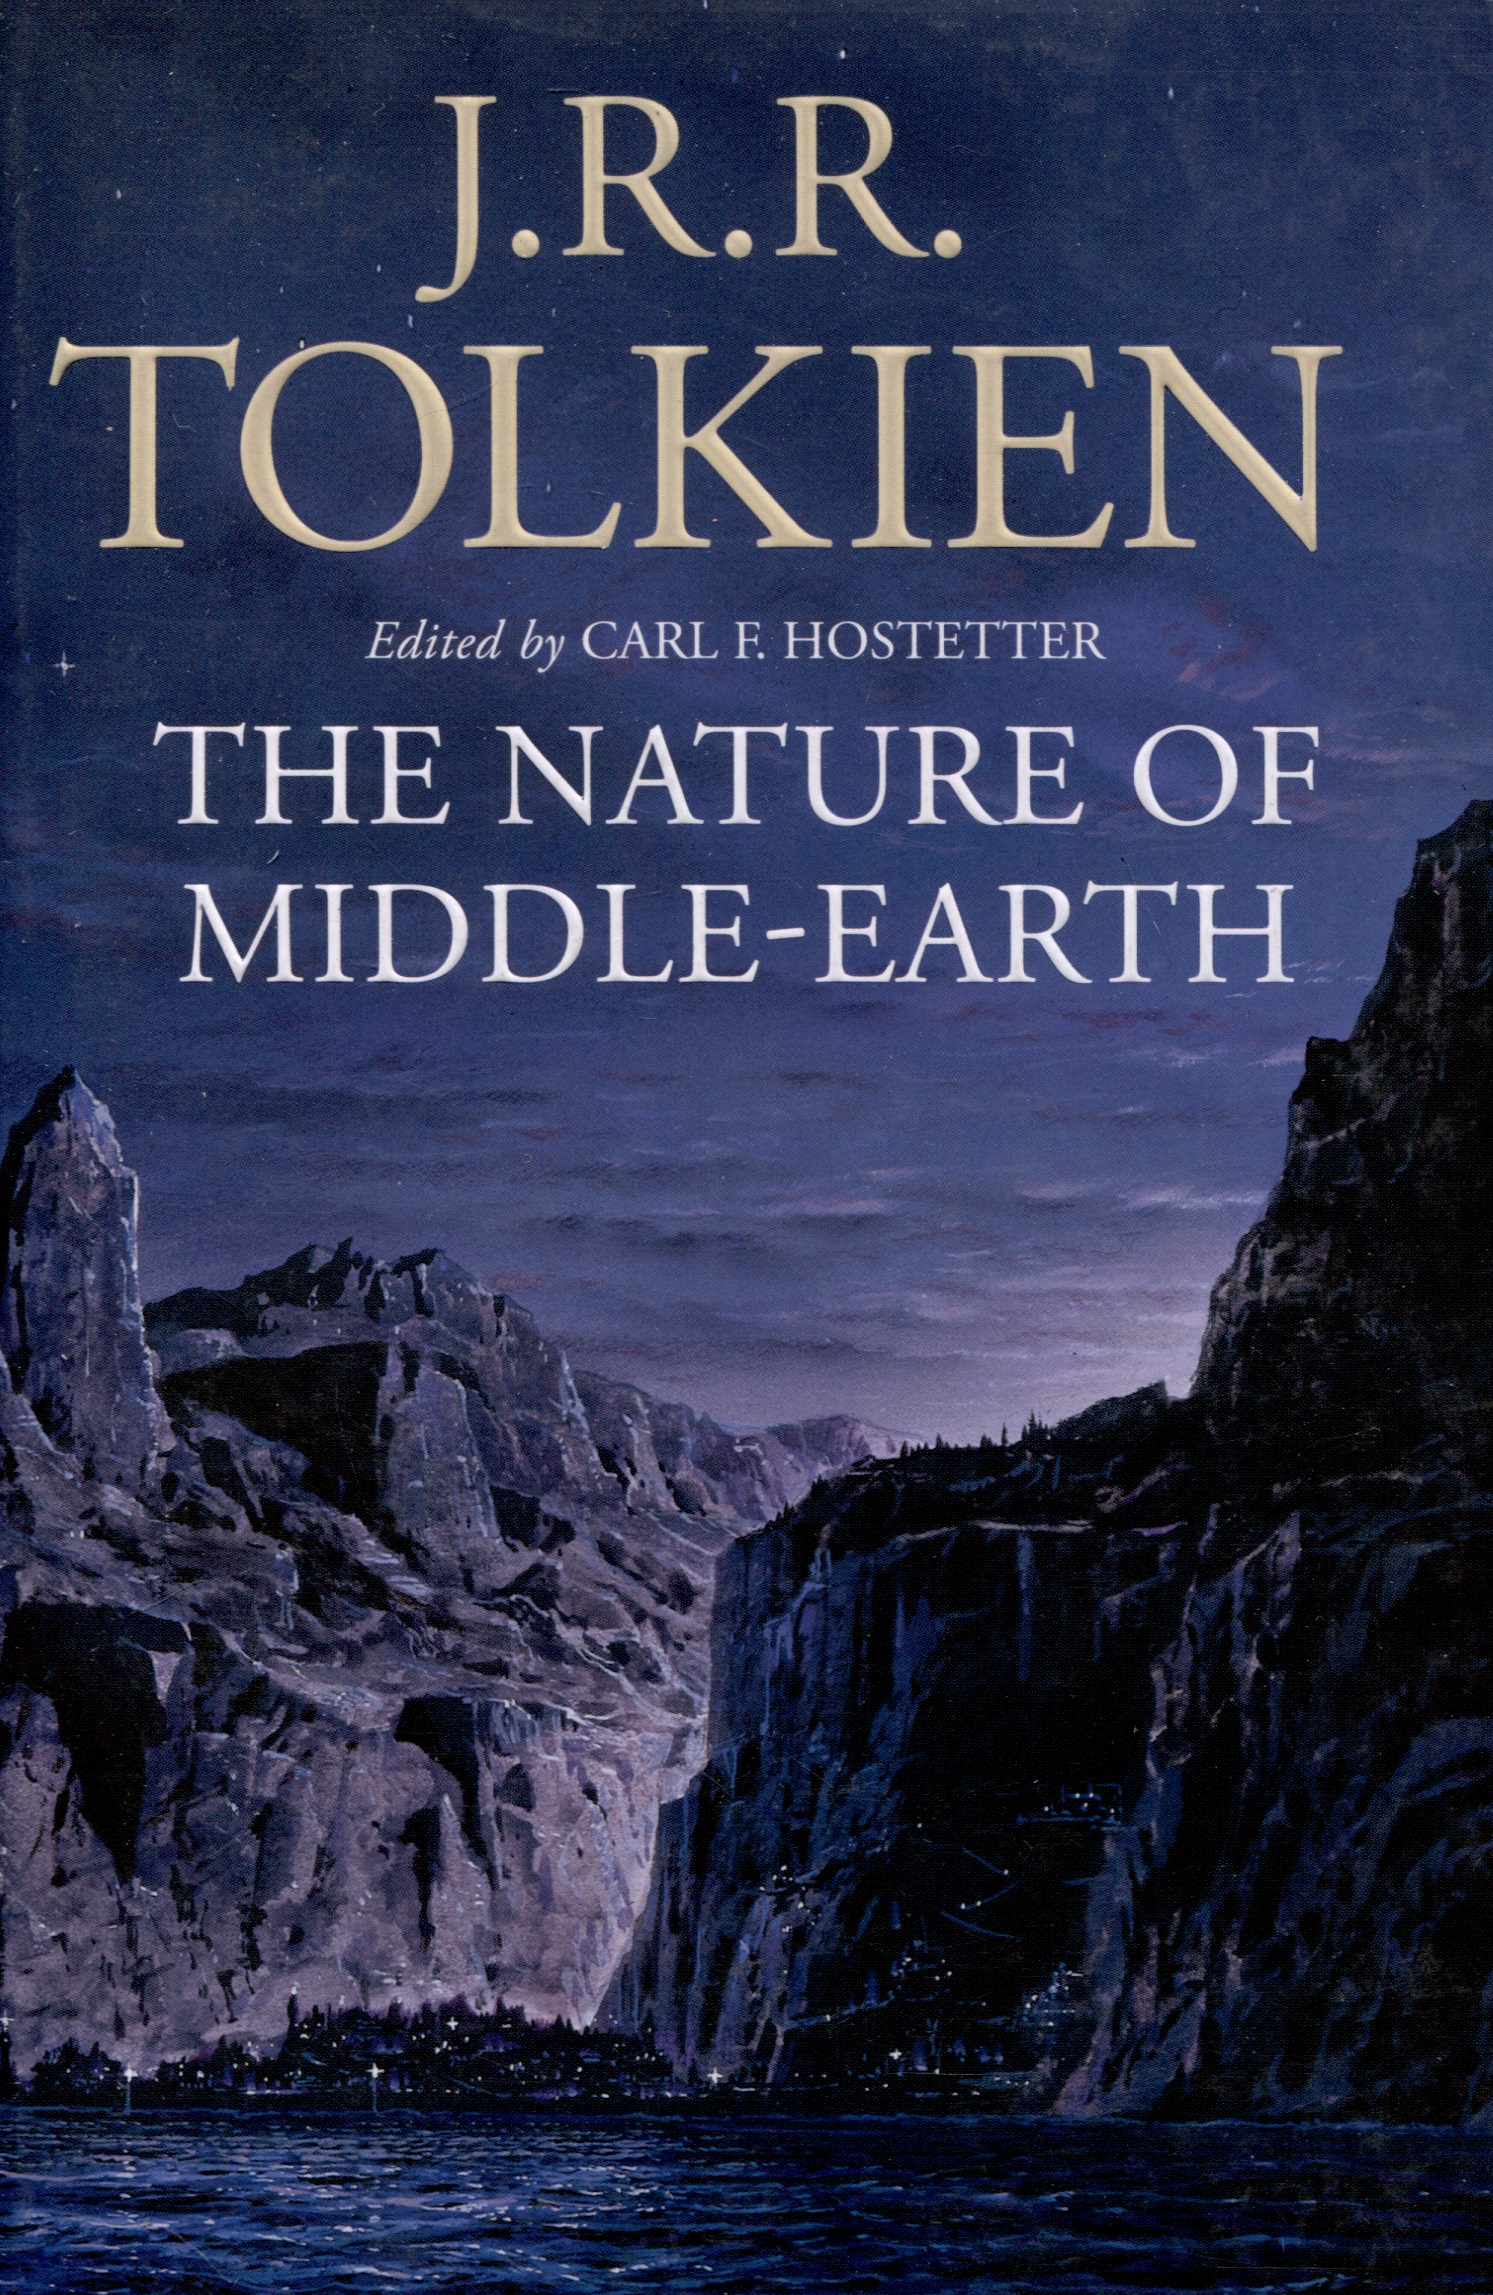 The Nature Of Middle-Earth harvey david the song of middle earth j r r tolkien’s themes symbols and myths